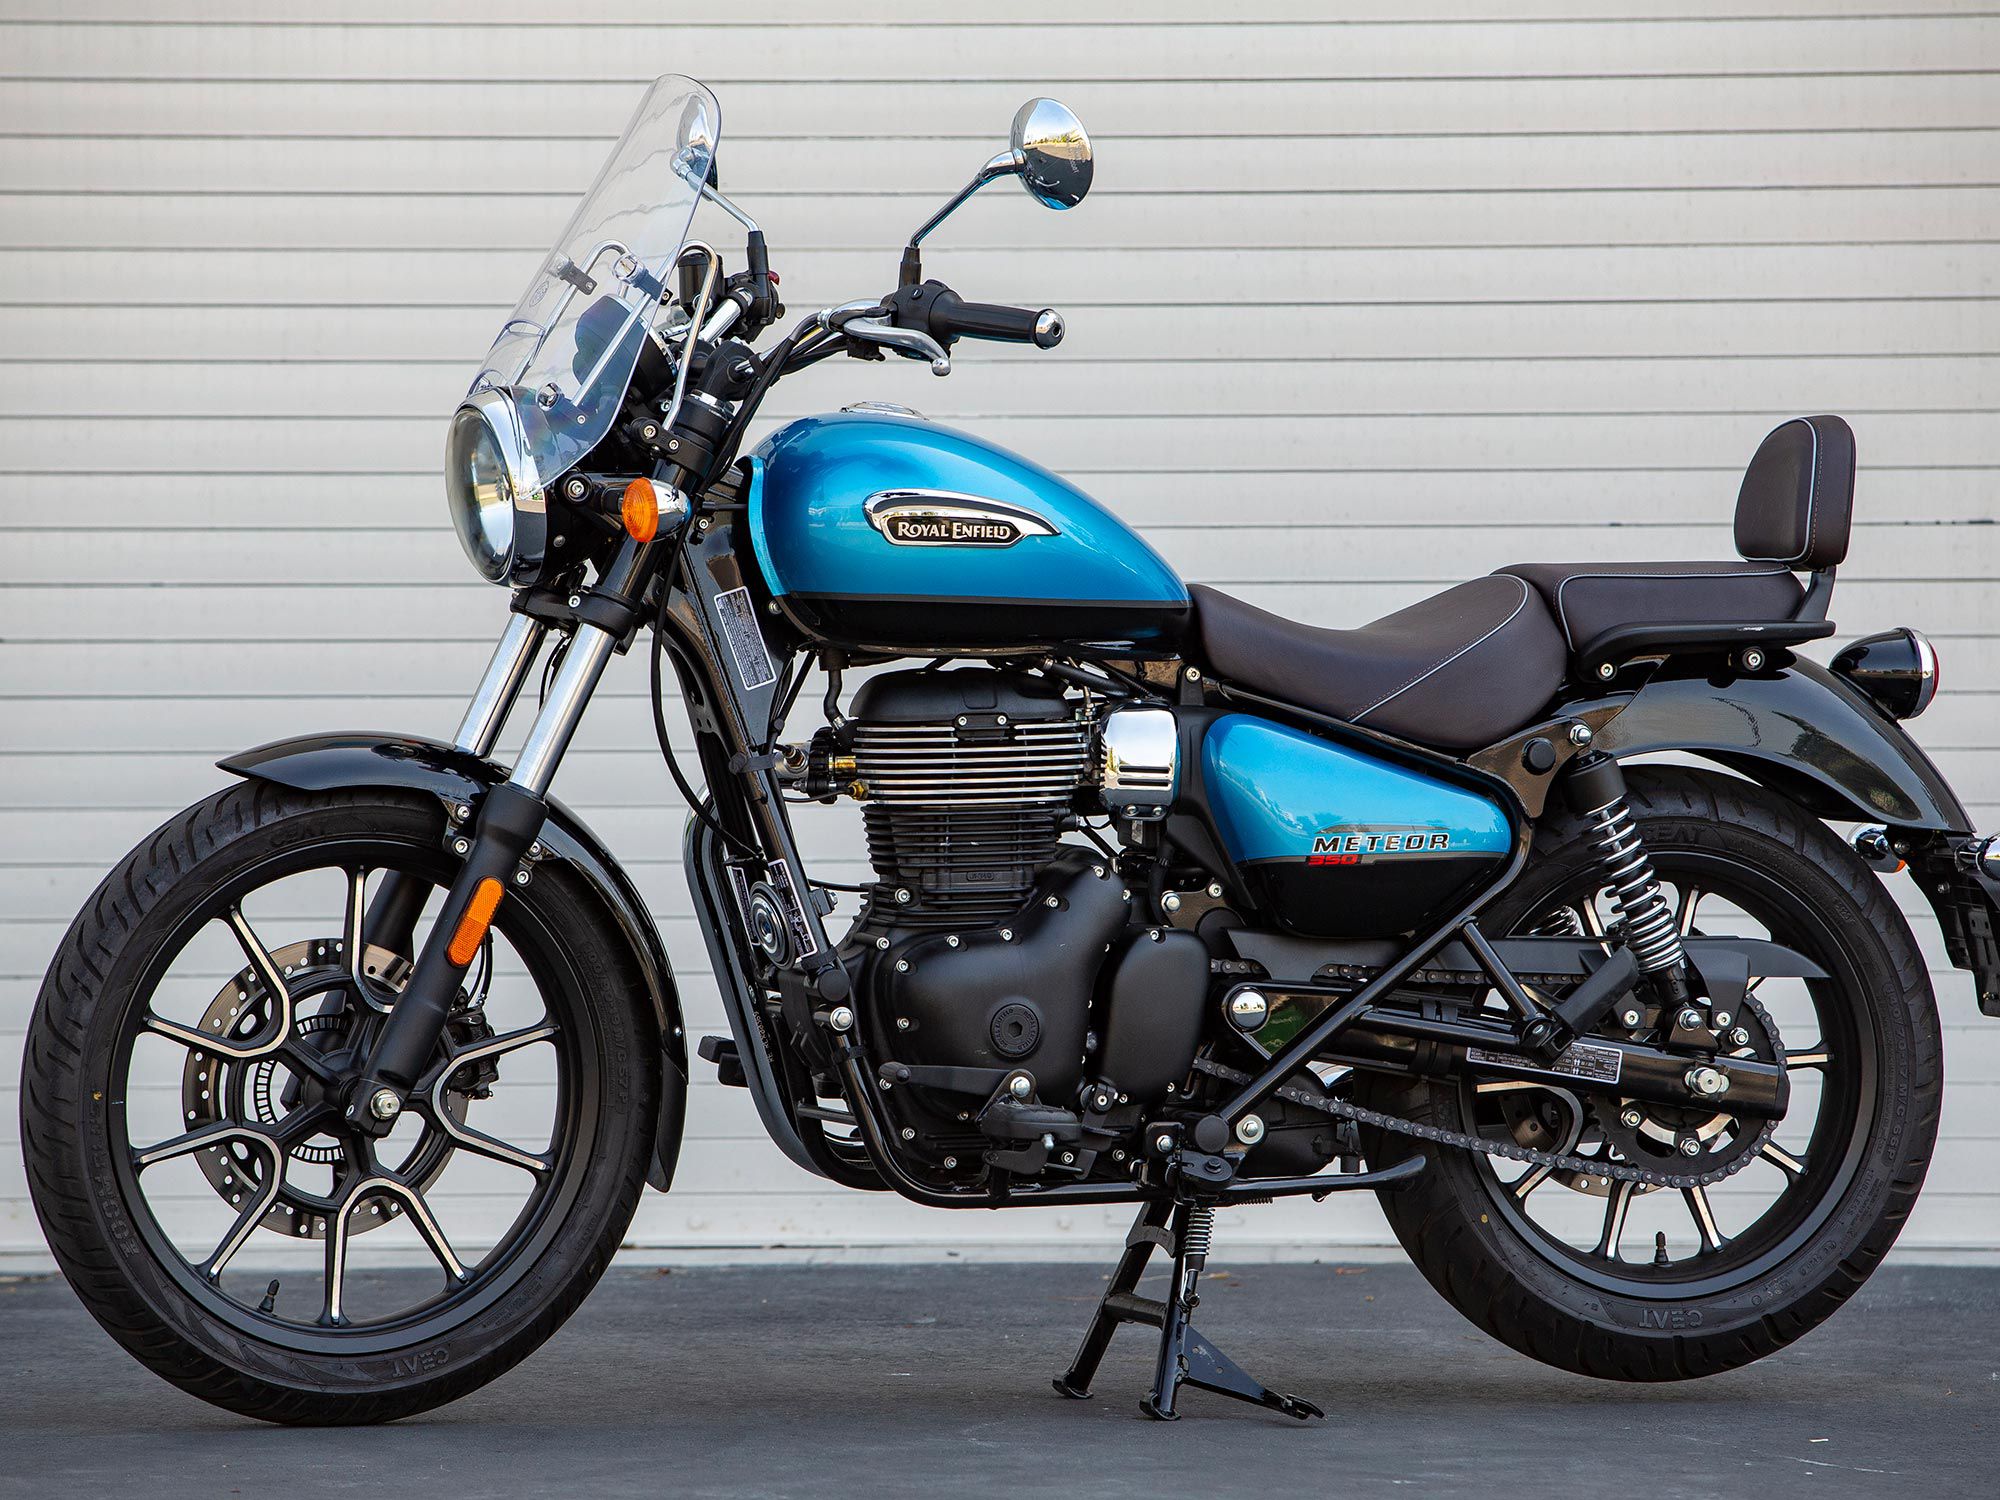 A relatively low $4,599 MSRP makes this Royal Enfield Meteor 350 a budget-conscious machine, while the classic styling adds a premium feel.